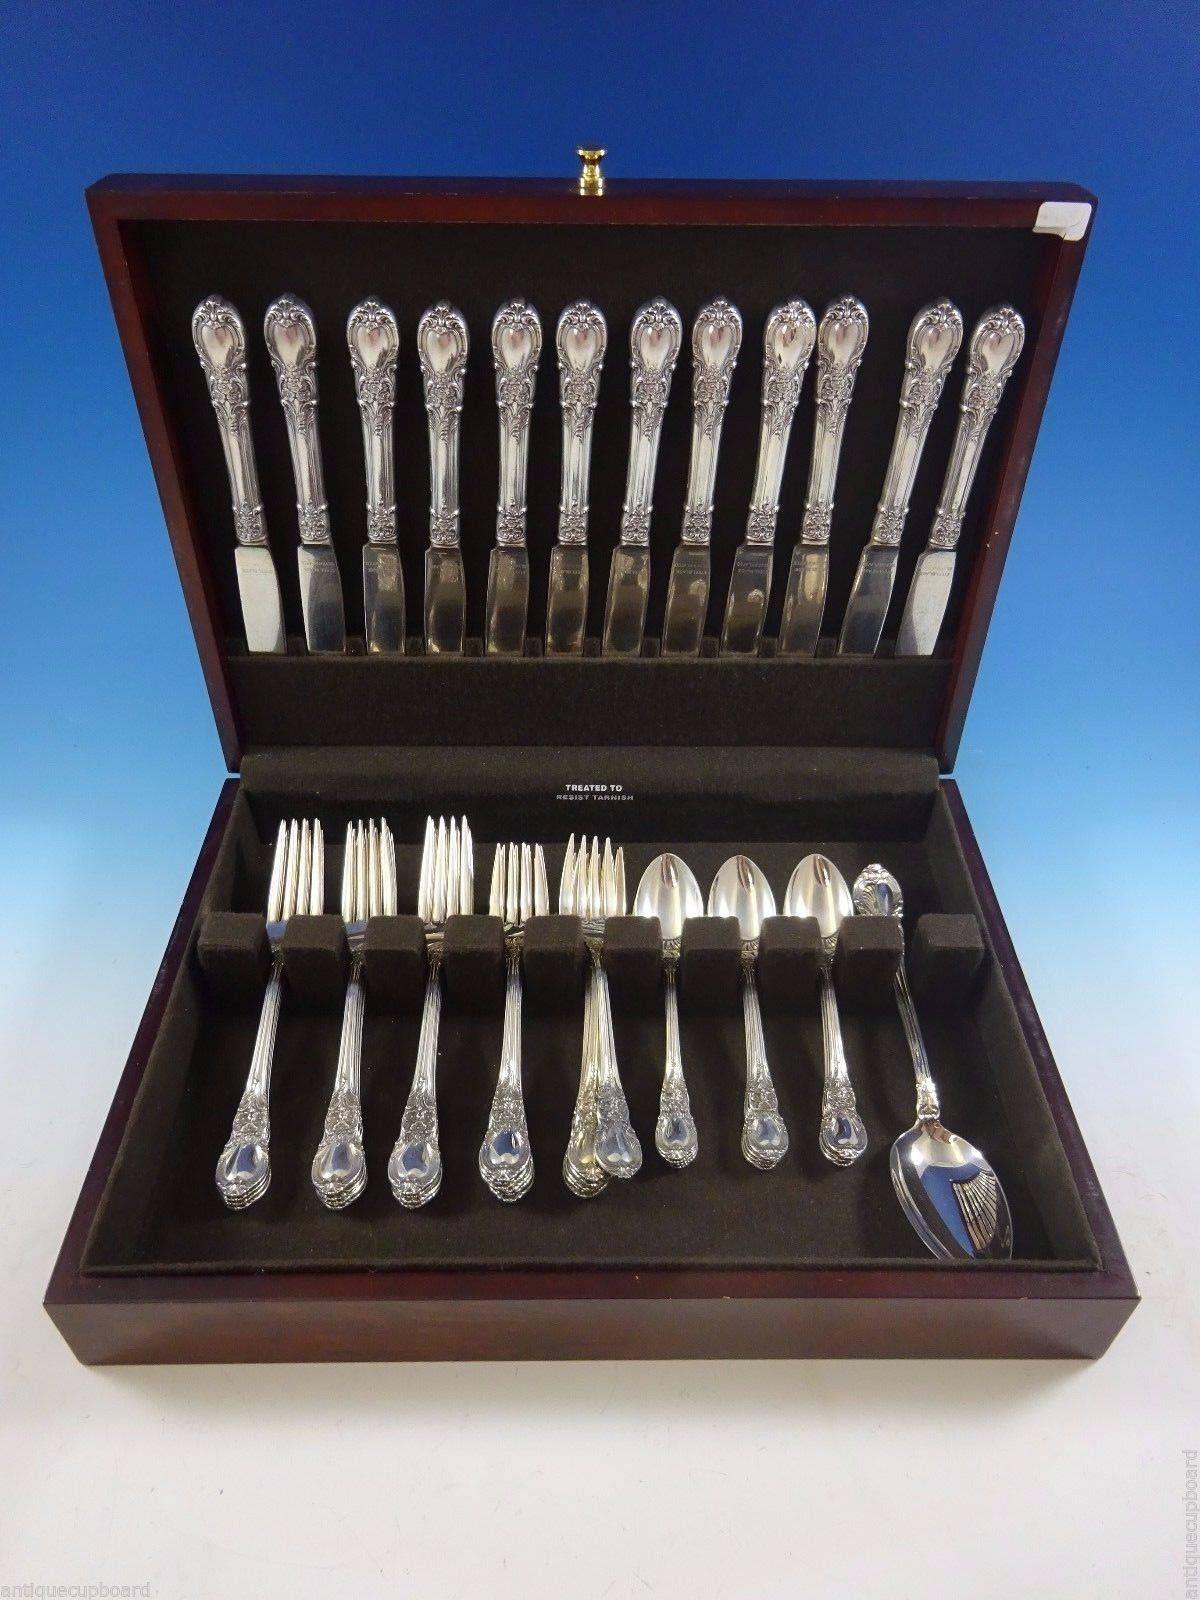 American Victorian by Lunt sterling silver flatware set of 49 Pieces includes:

12 regular knives, 8 5/8